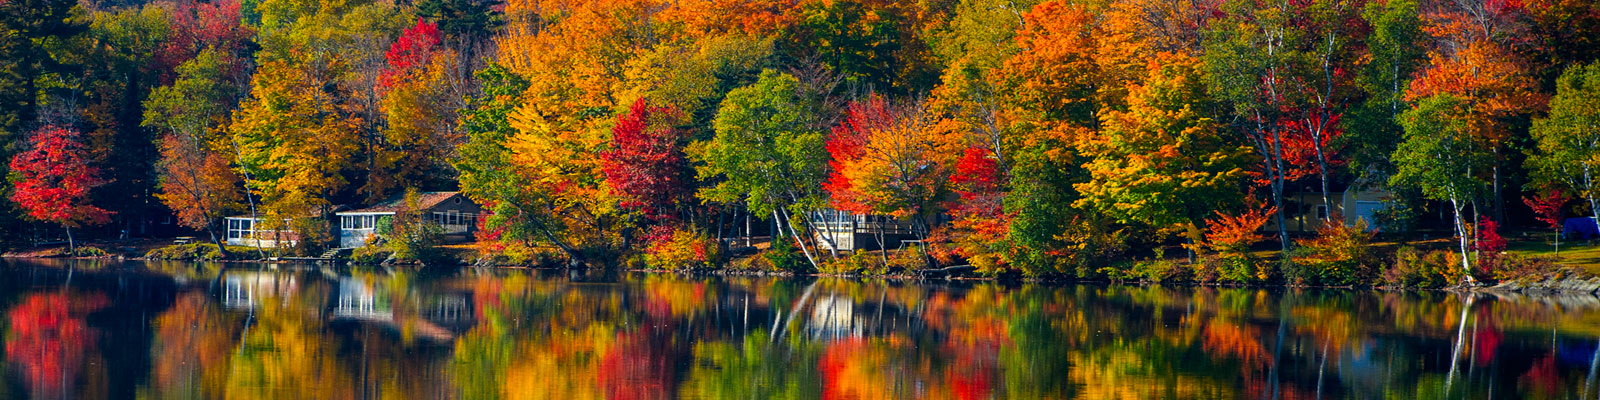 7 of the Best Fall Foliage Destinations Across the US